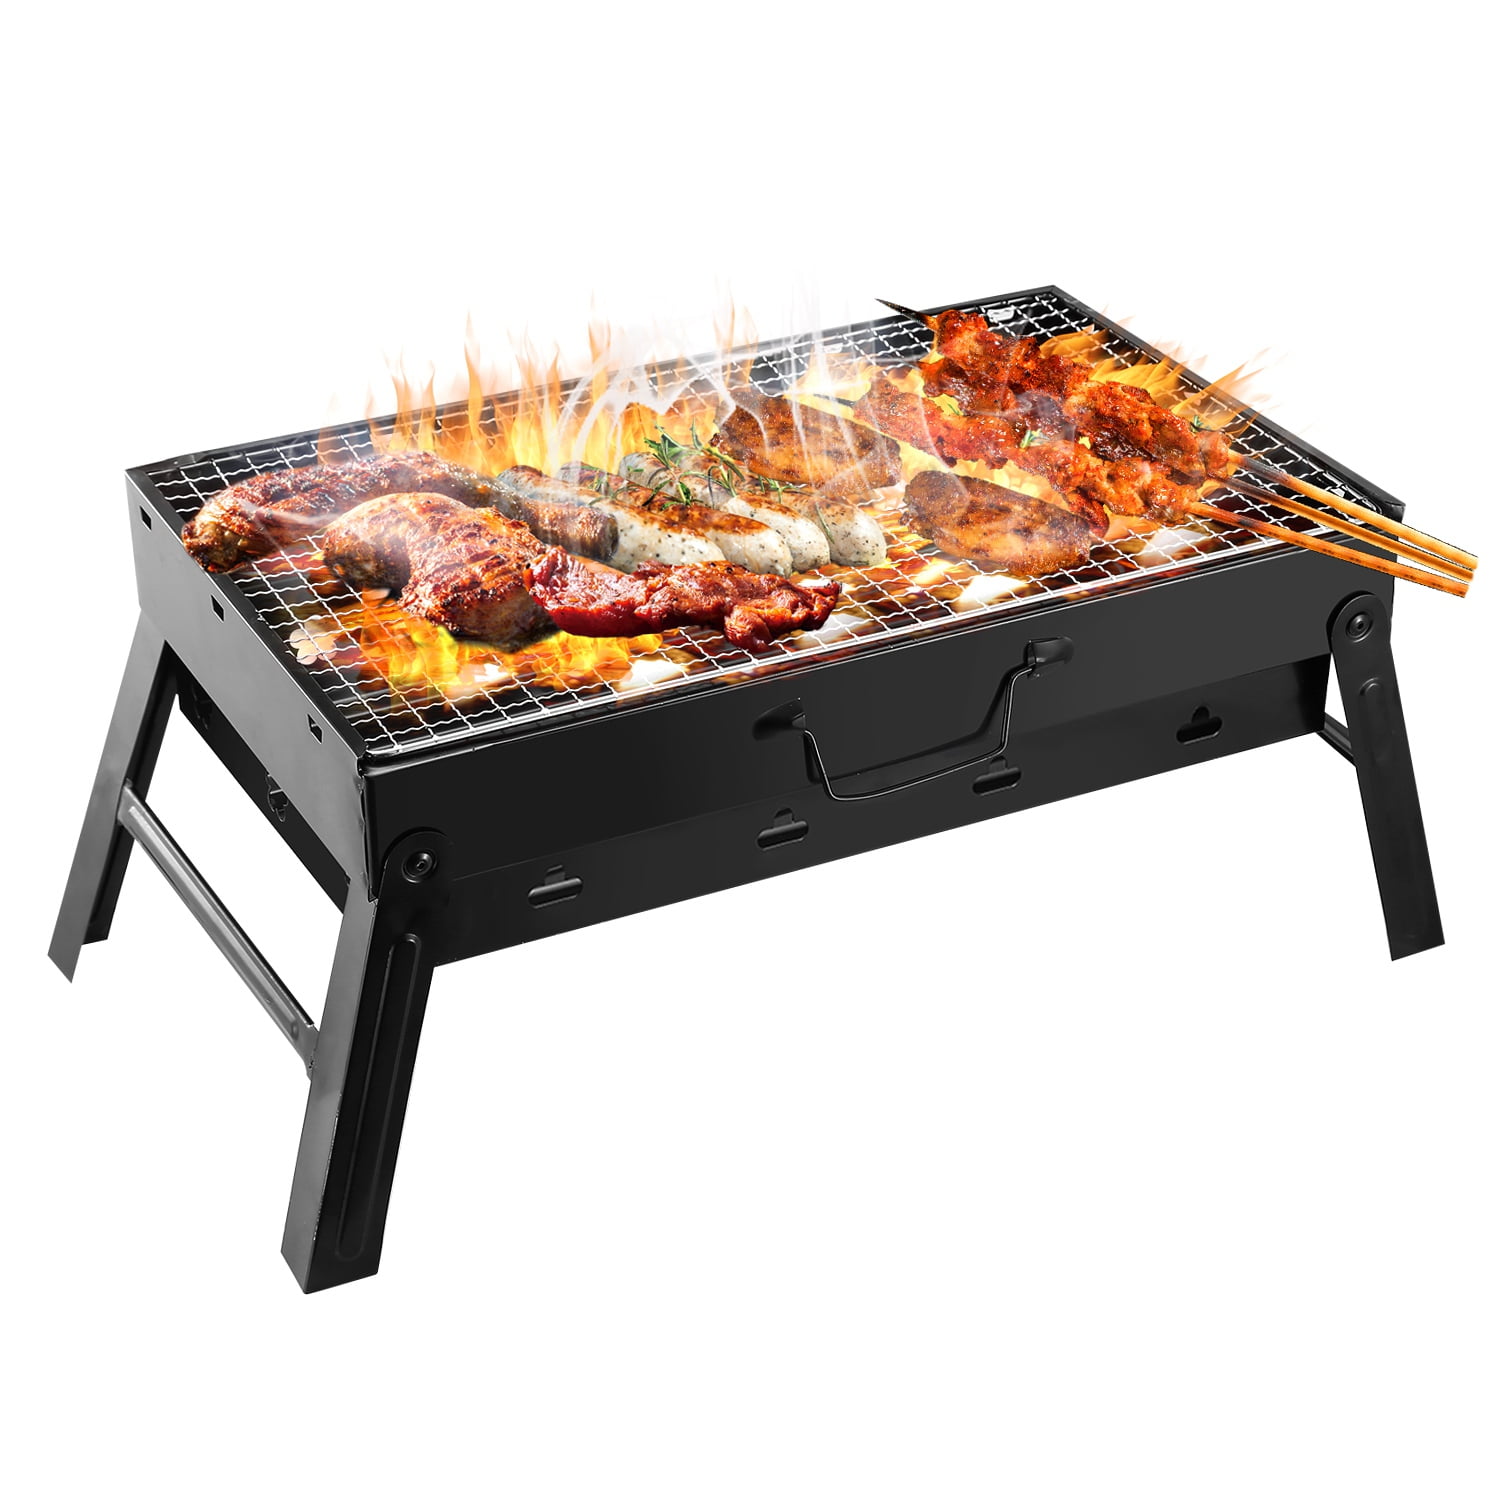 Charcoal BBQ Grill Barbecue Red Camp Garden Picnic Outdoor Portable Grill BBQ 